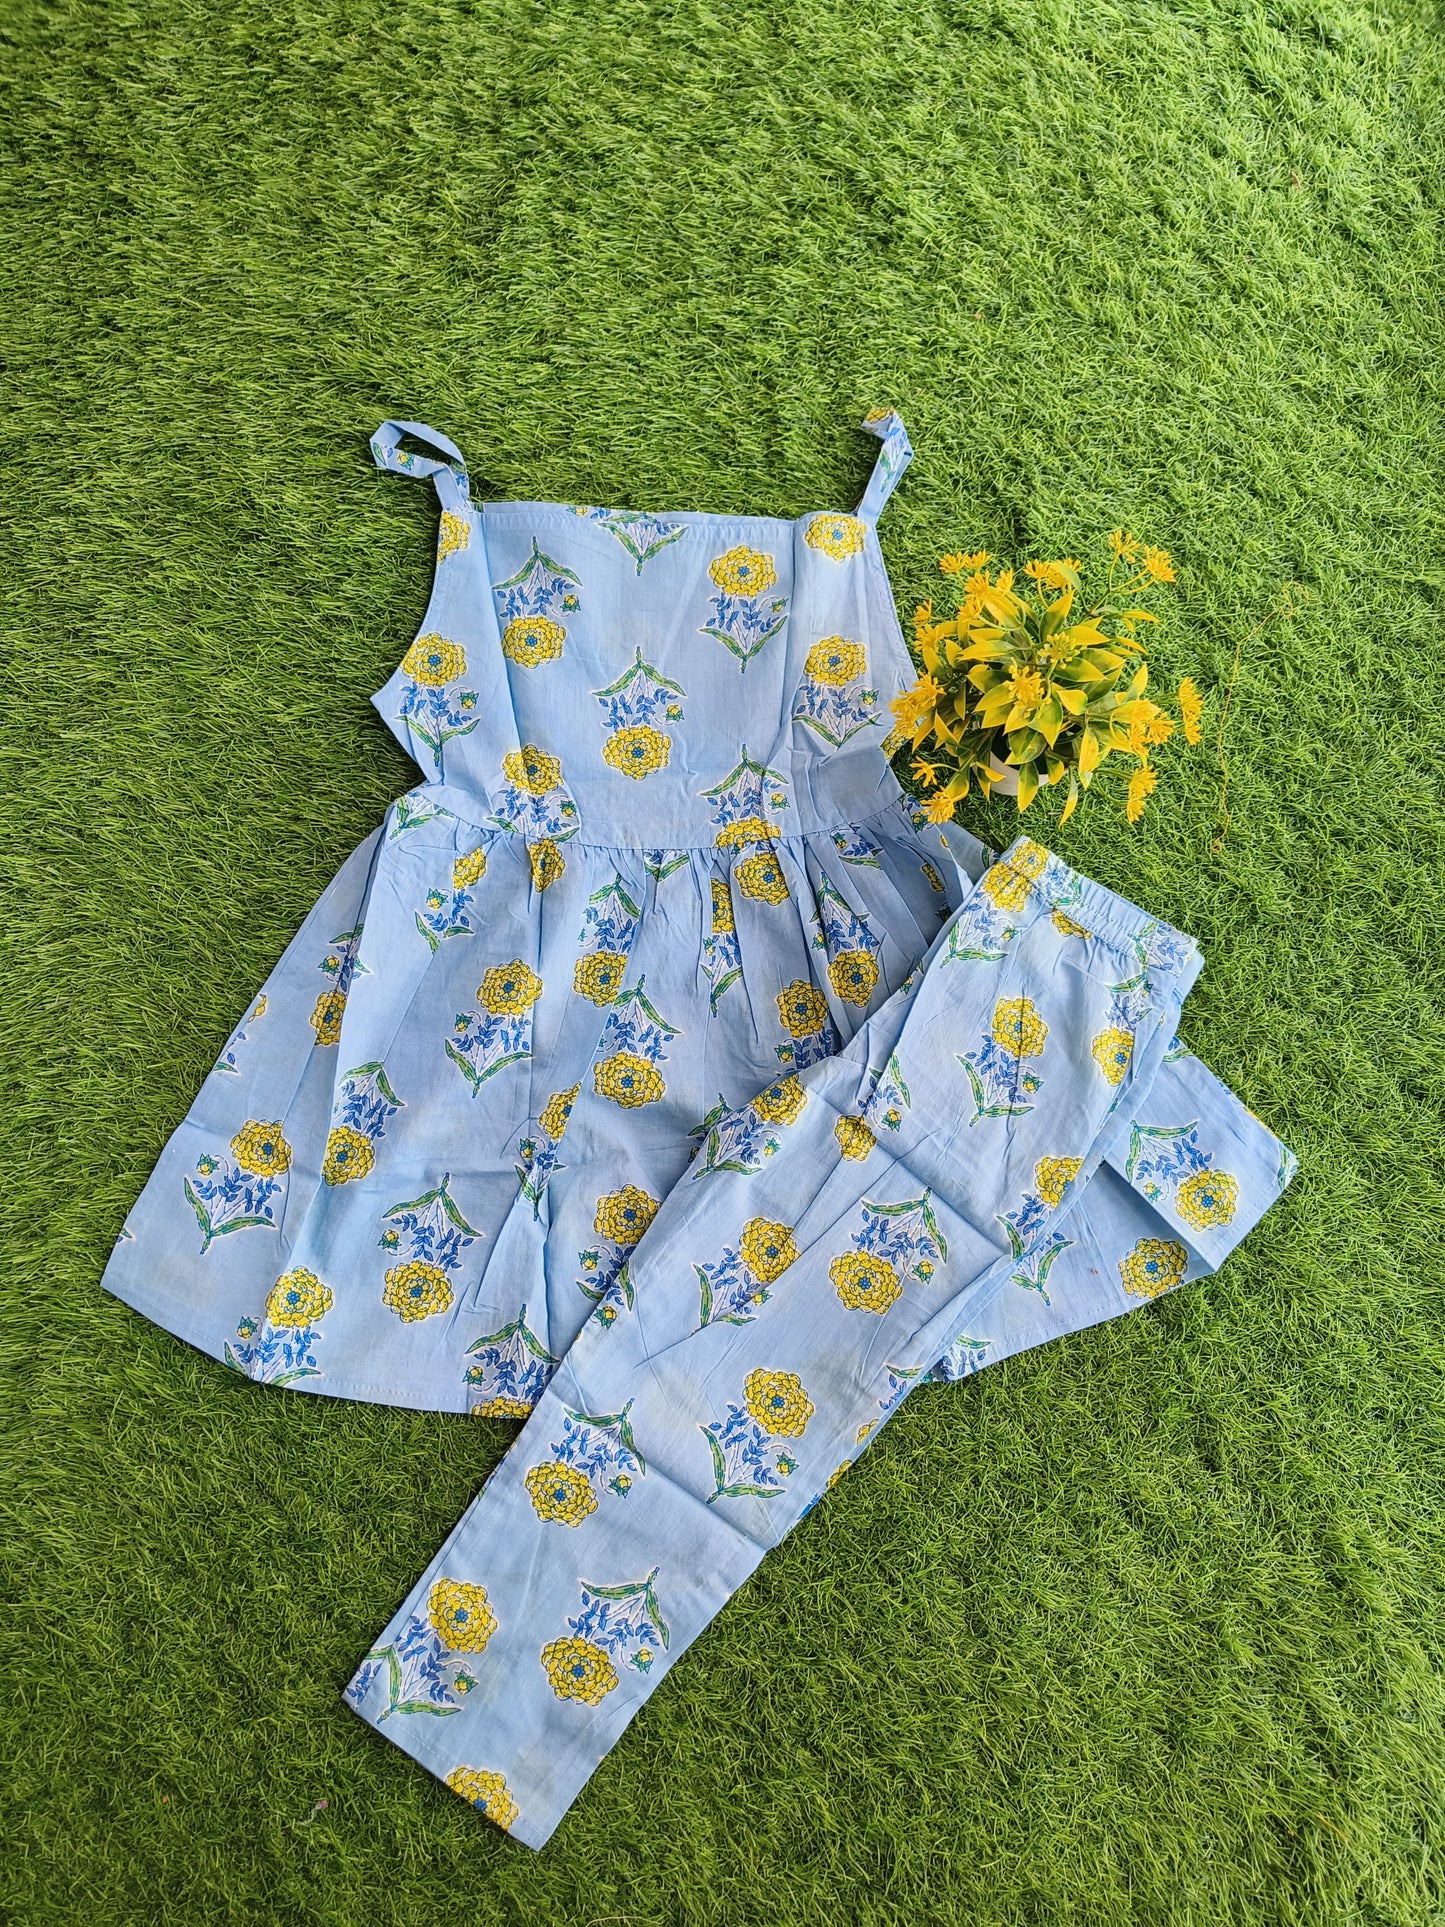 Melodious Sun Flowered Printed Sky Blue Kurti and Pant Outfit for Girl